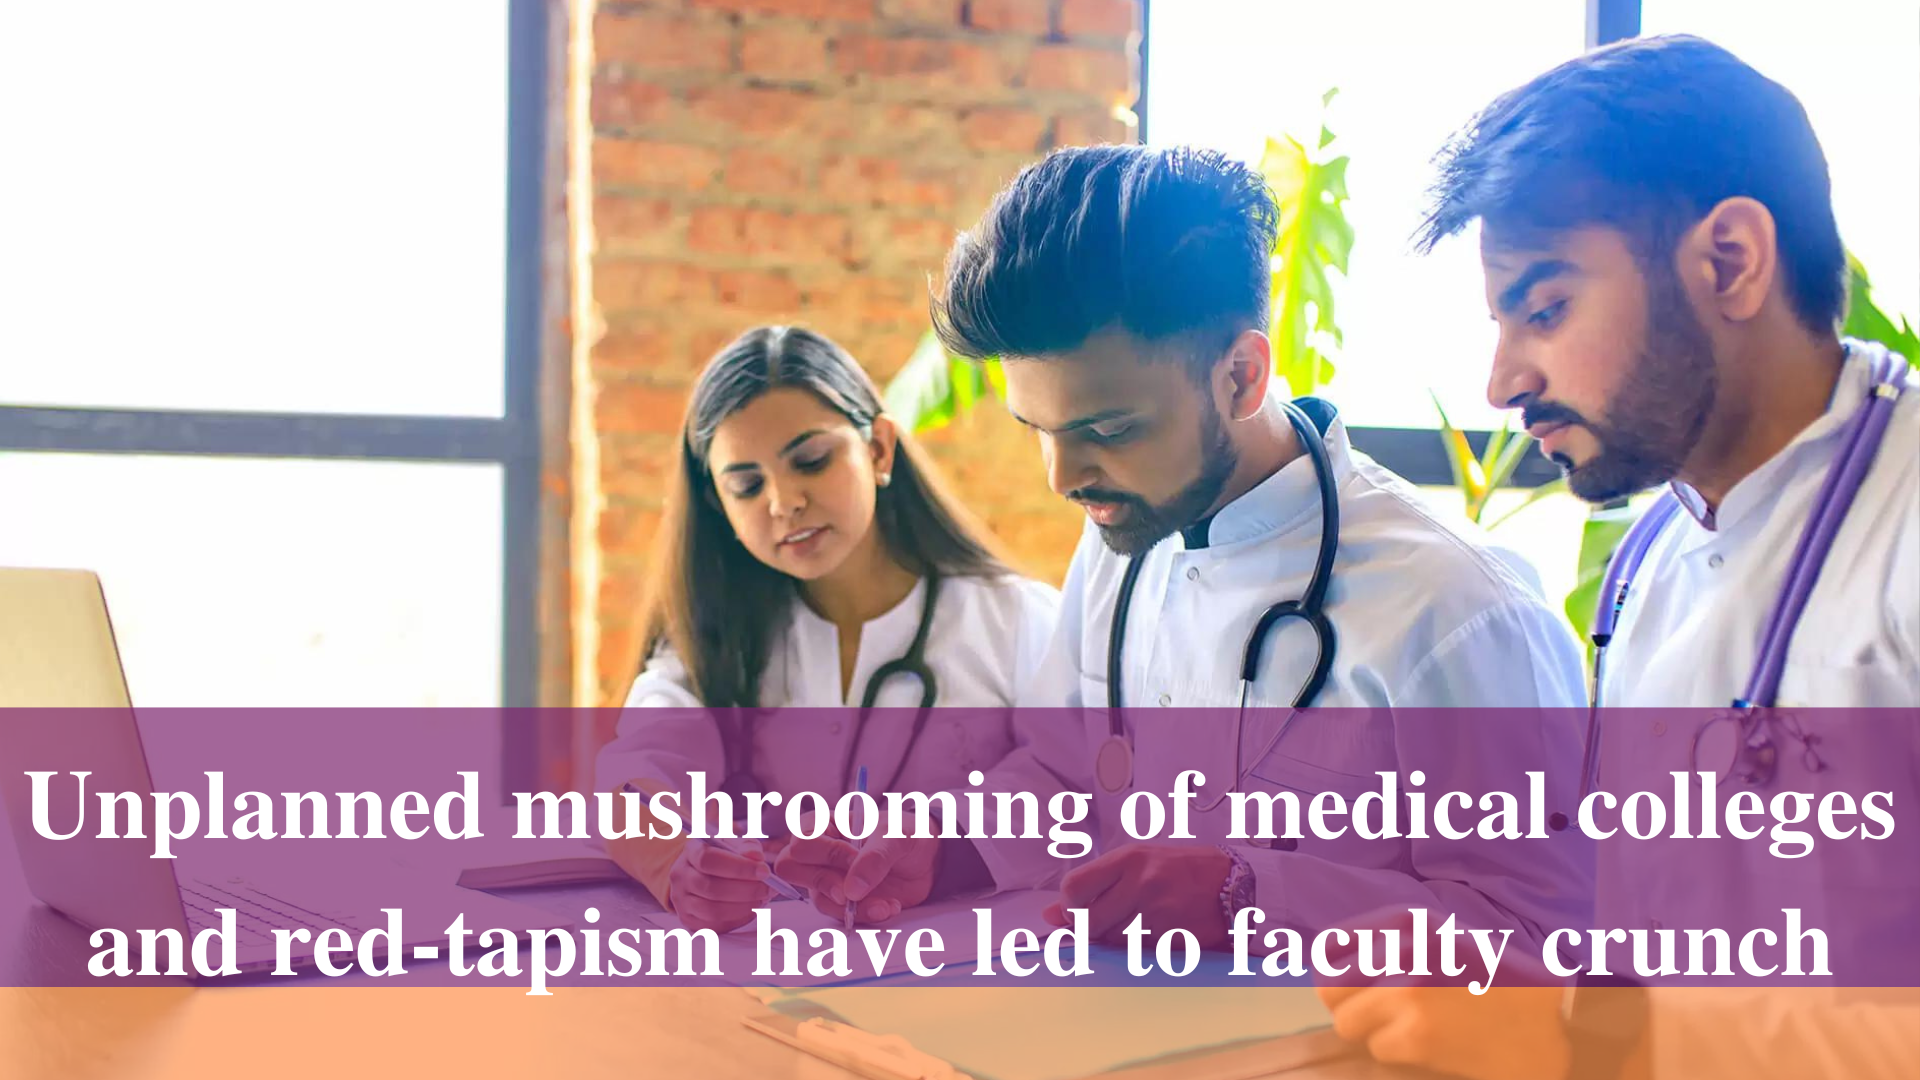 Unplanned mushrooming of medical colleges and red-tapism have led to faculty crunch